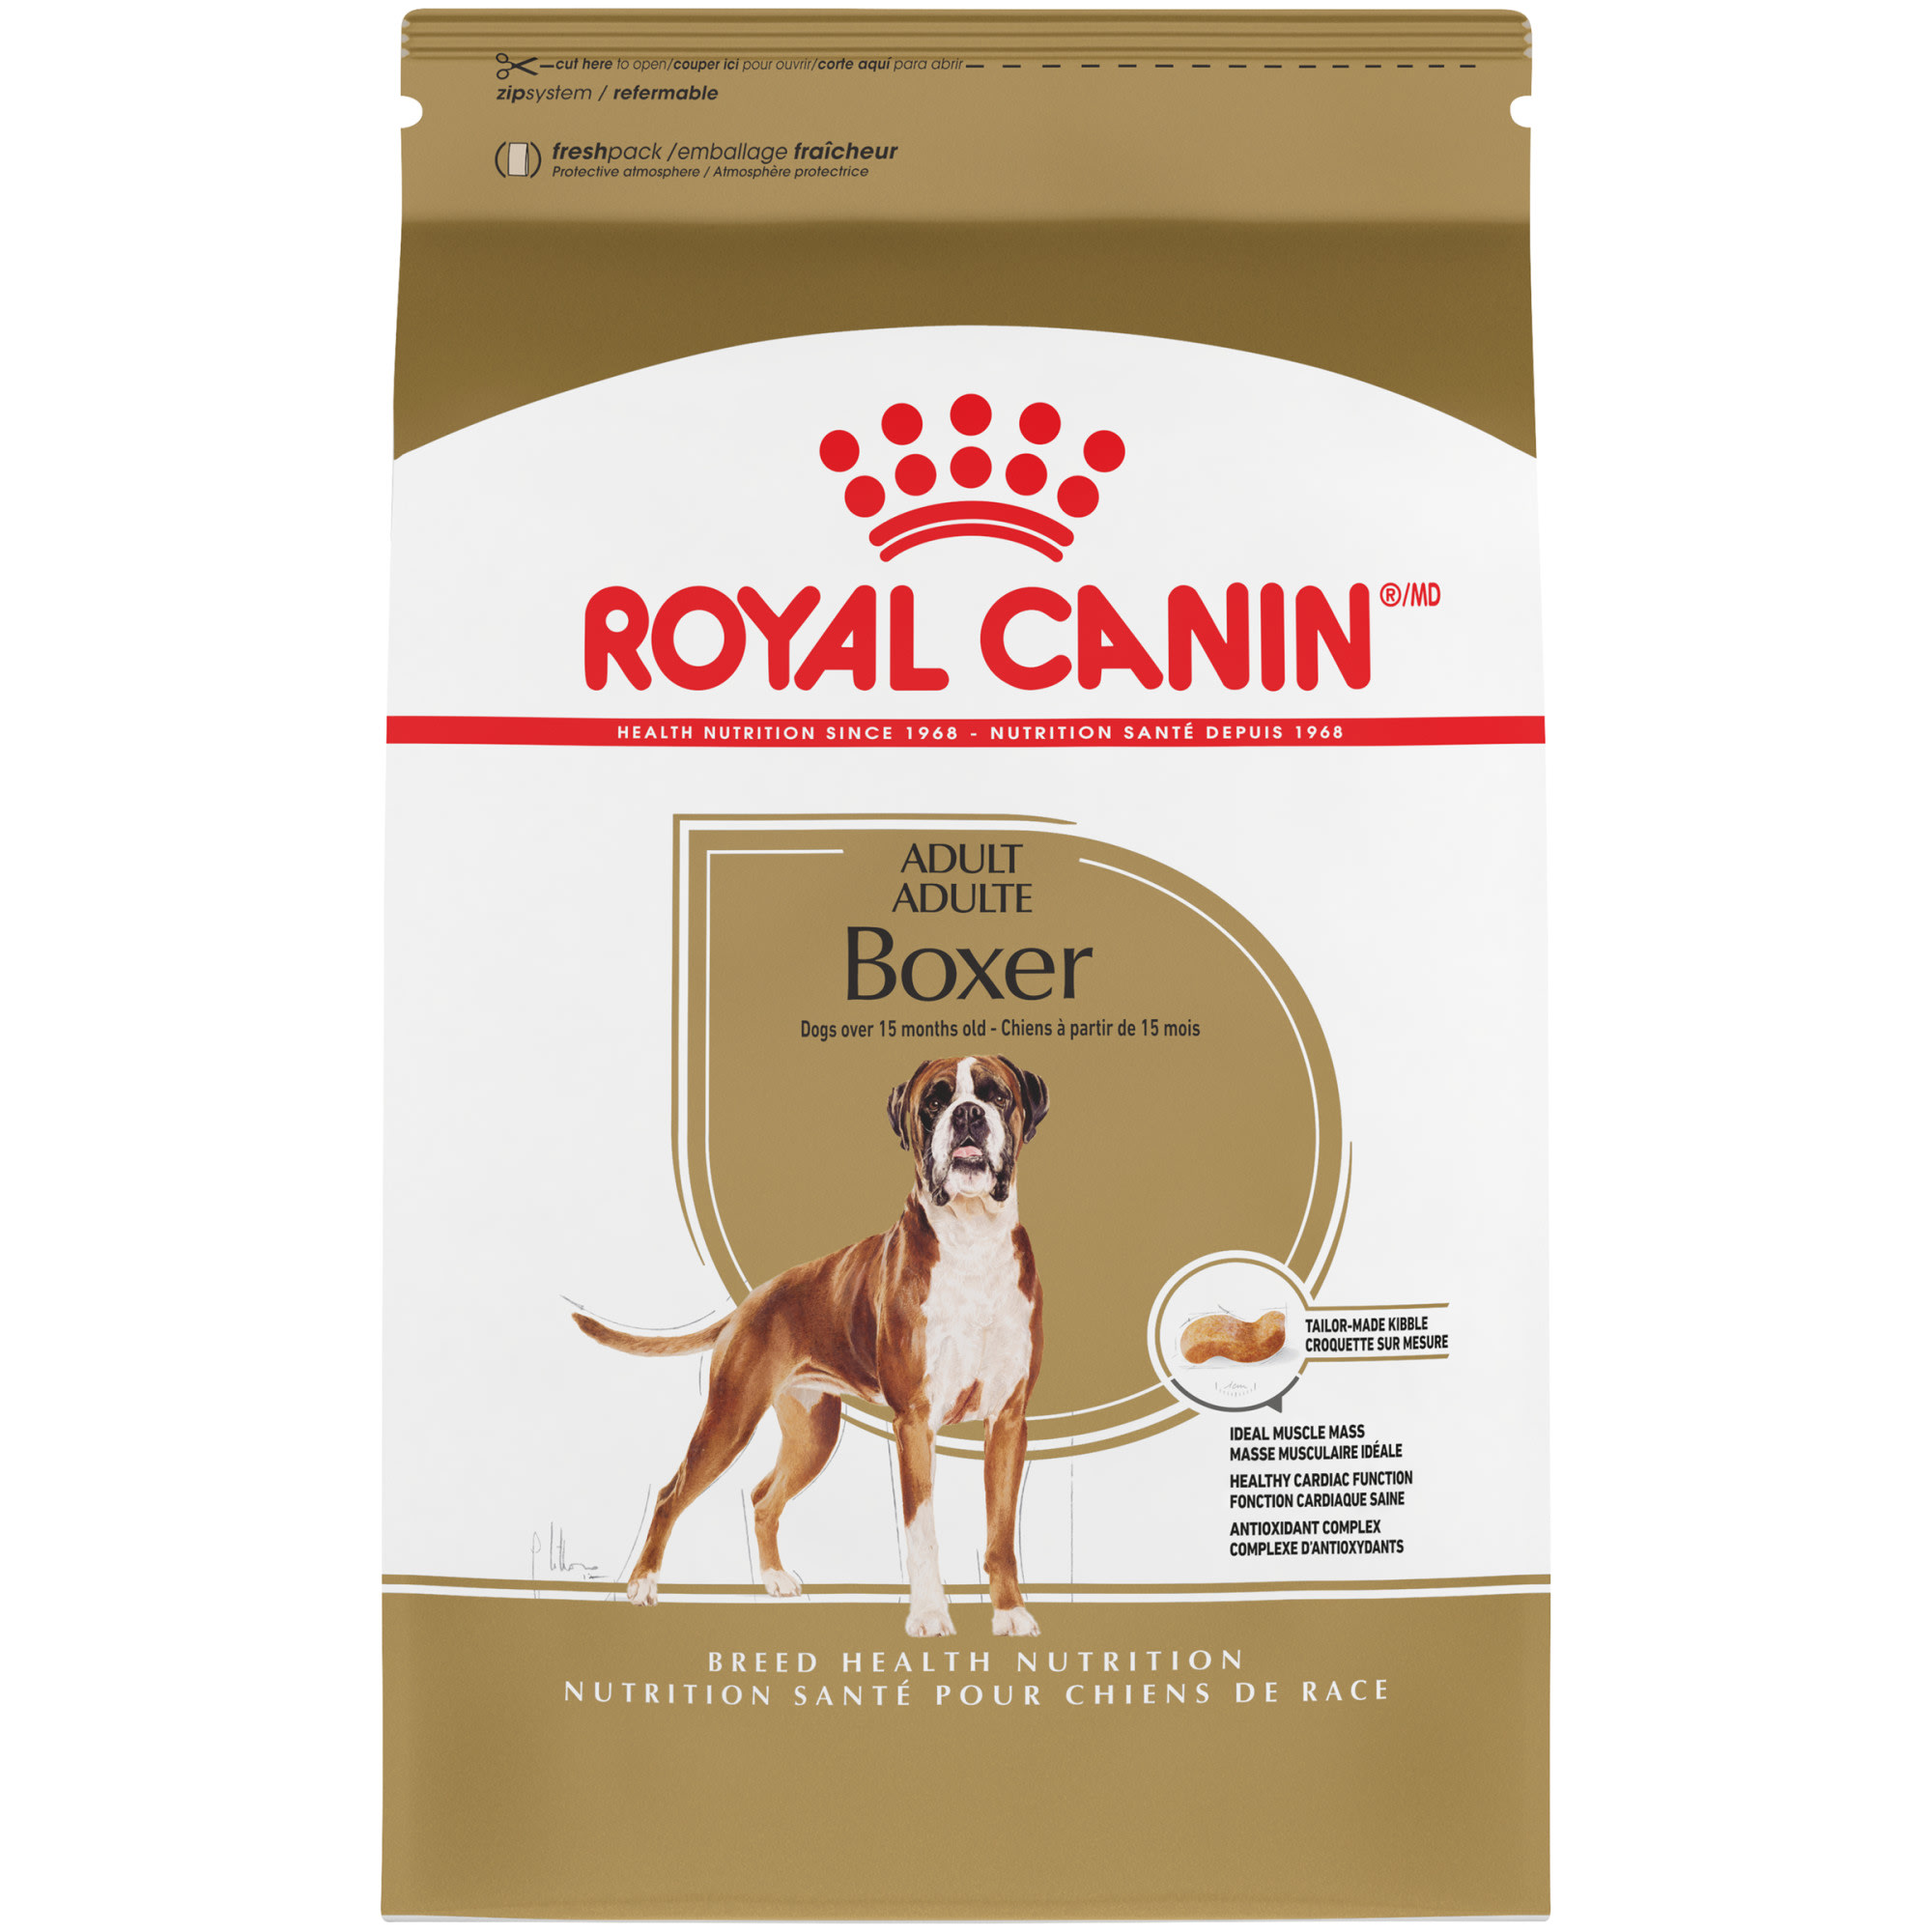 Boxer: Character, Health, Feeding, Price, and Care